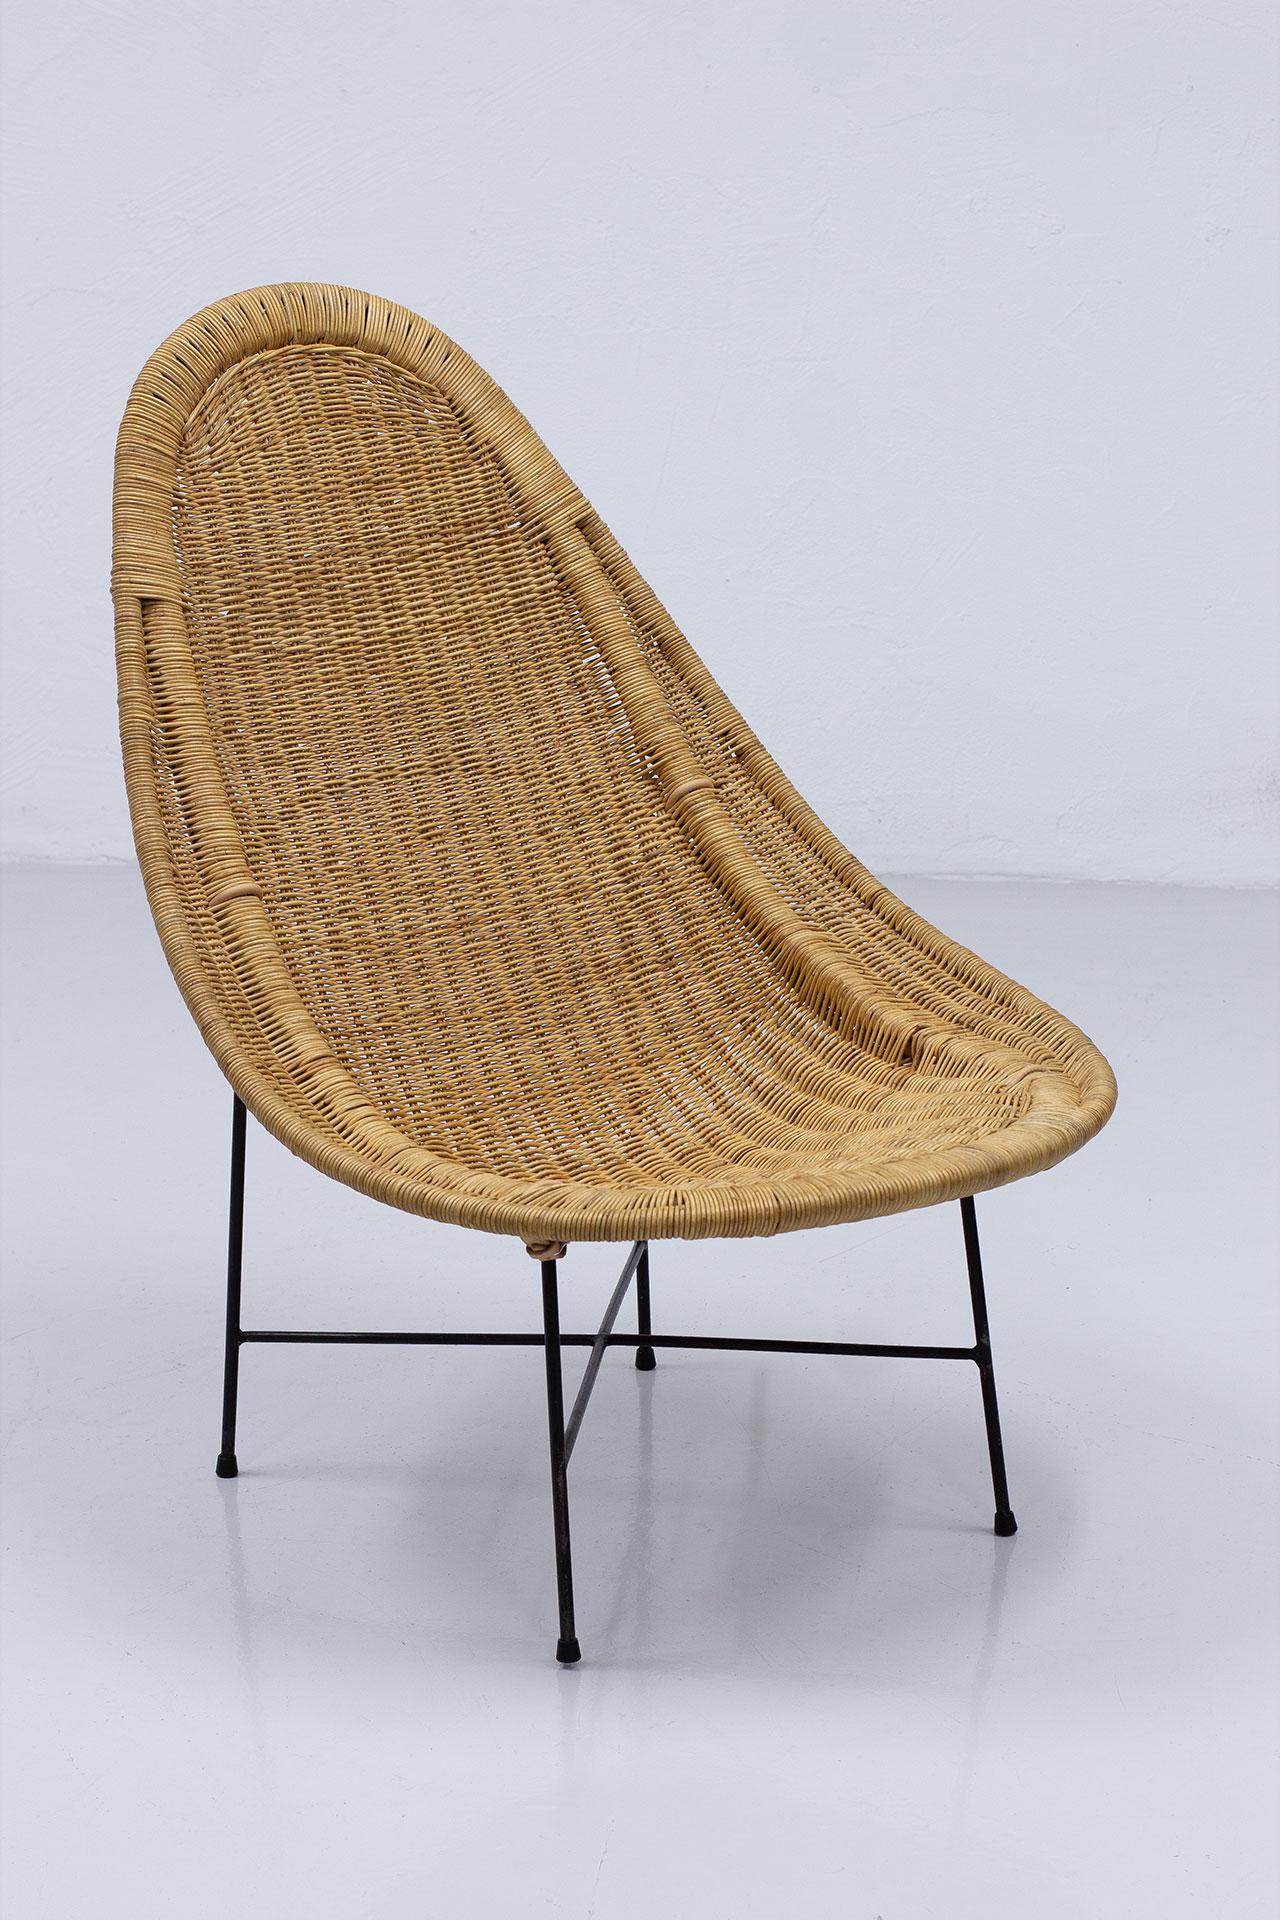 Swedish 'Stora Kraal' Lounge Chair in Woven Cane by Kerstin Hörlin Holmquist, Sweden For Sale